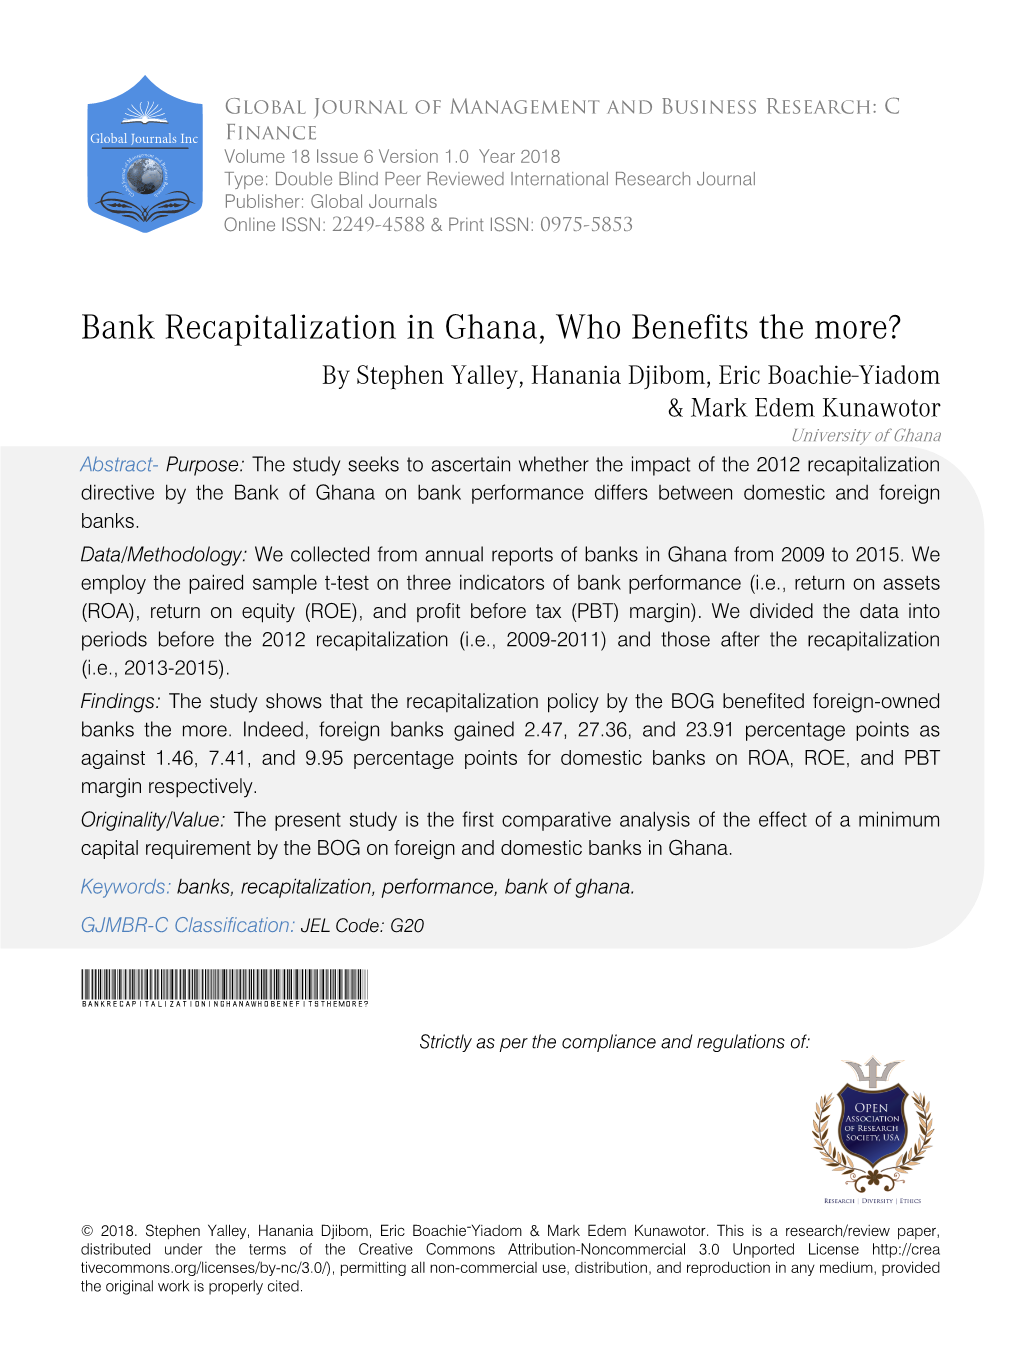 Bank Recapitalization in Ghana, Who Benefits the More?